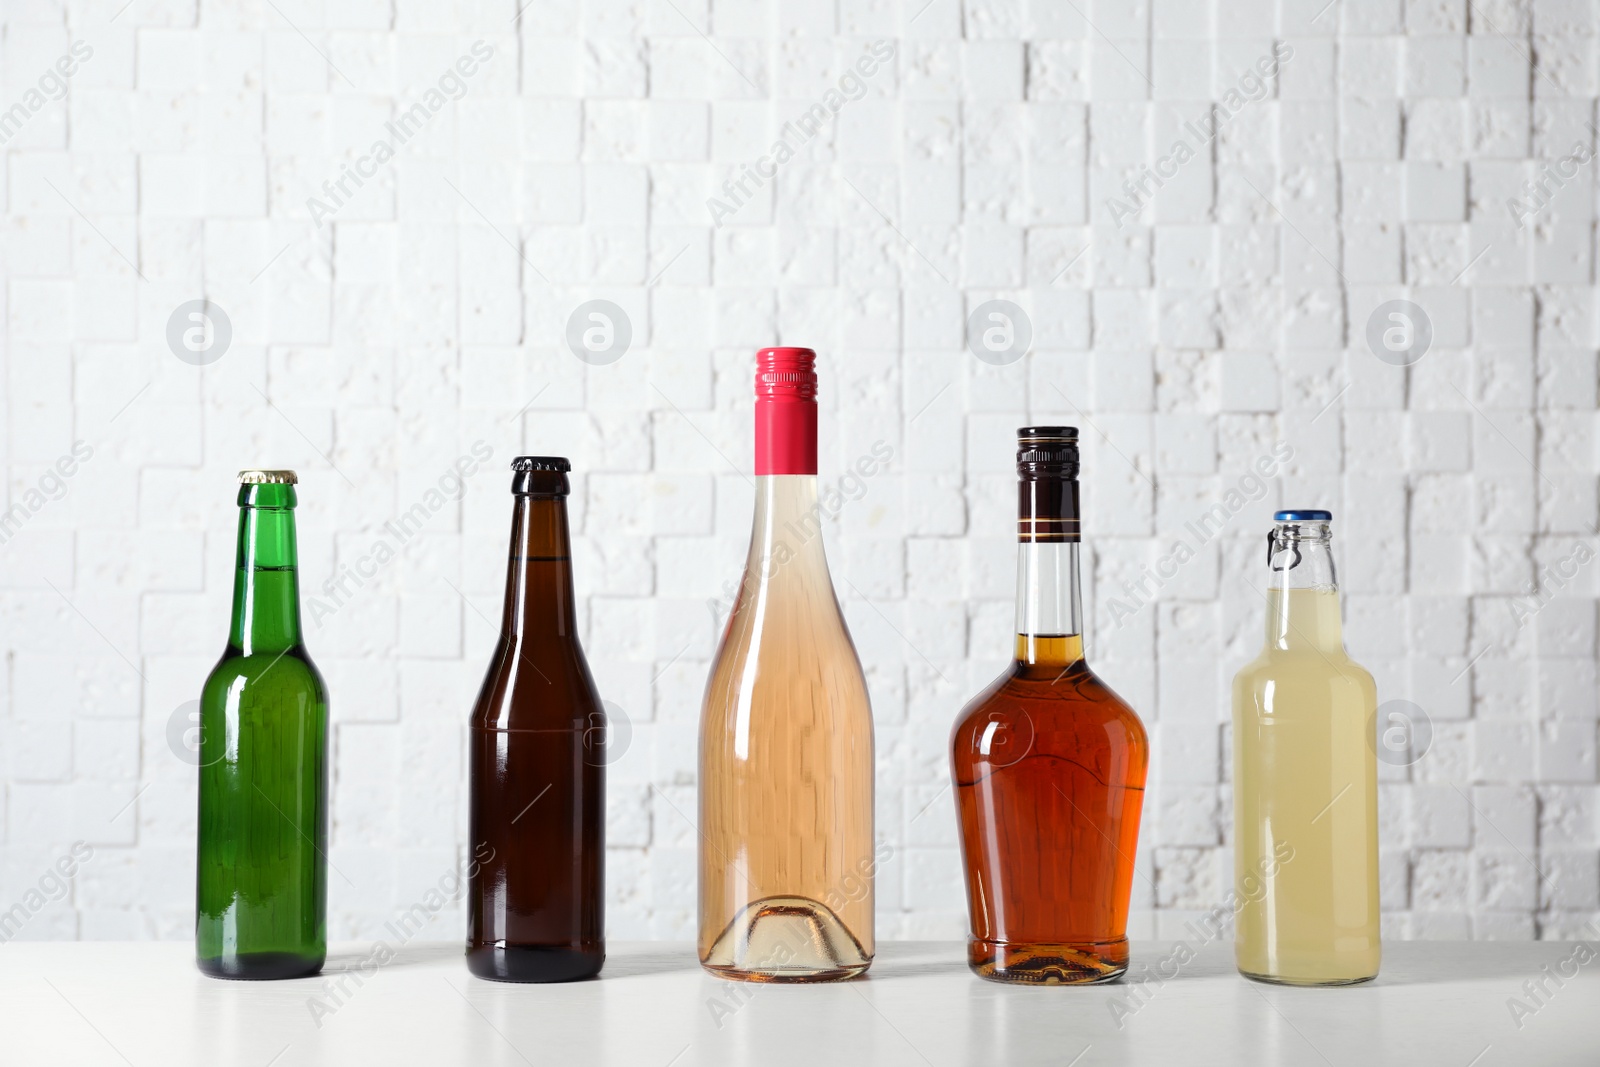 Photo of Bottles with different alcoholic drinks on table near white wall